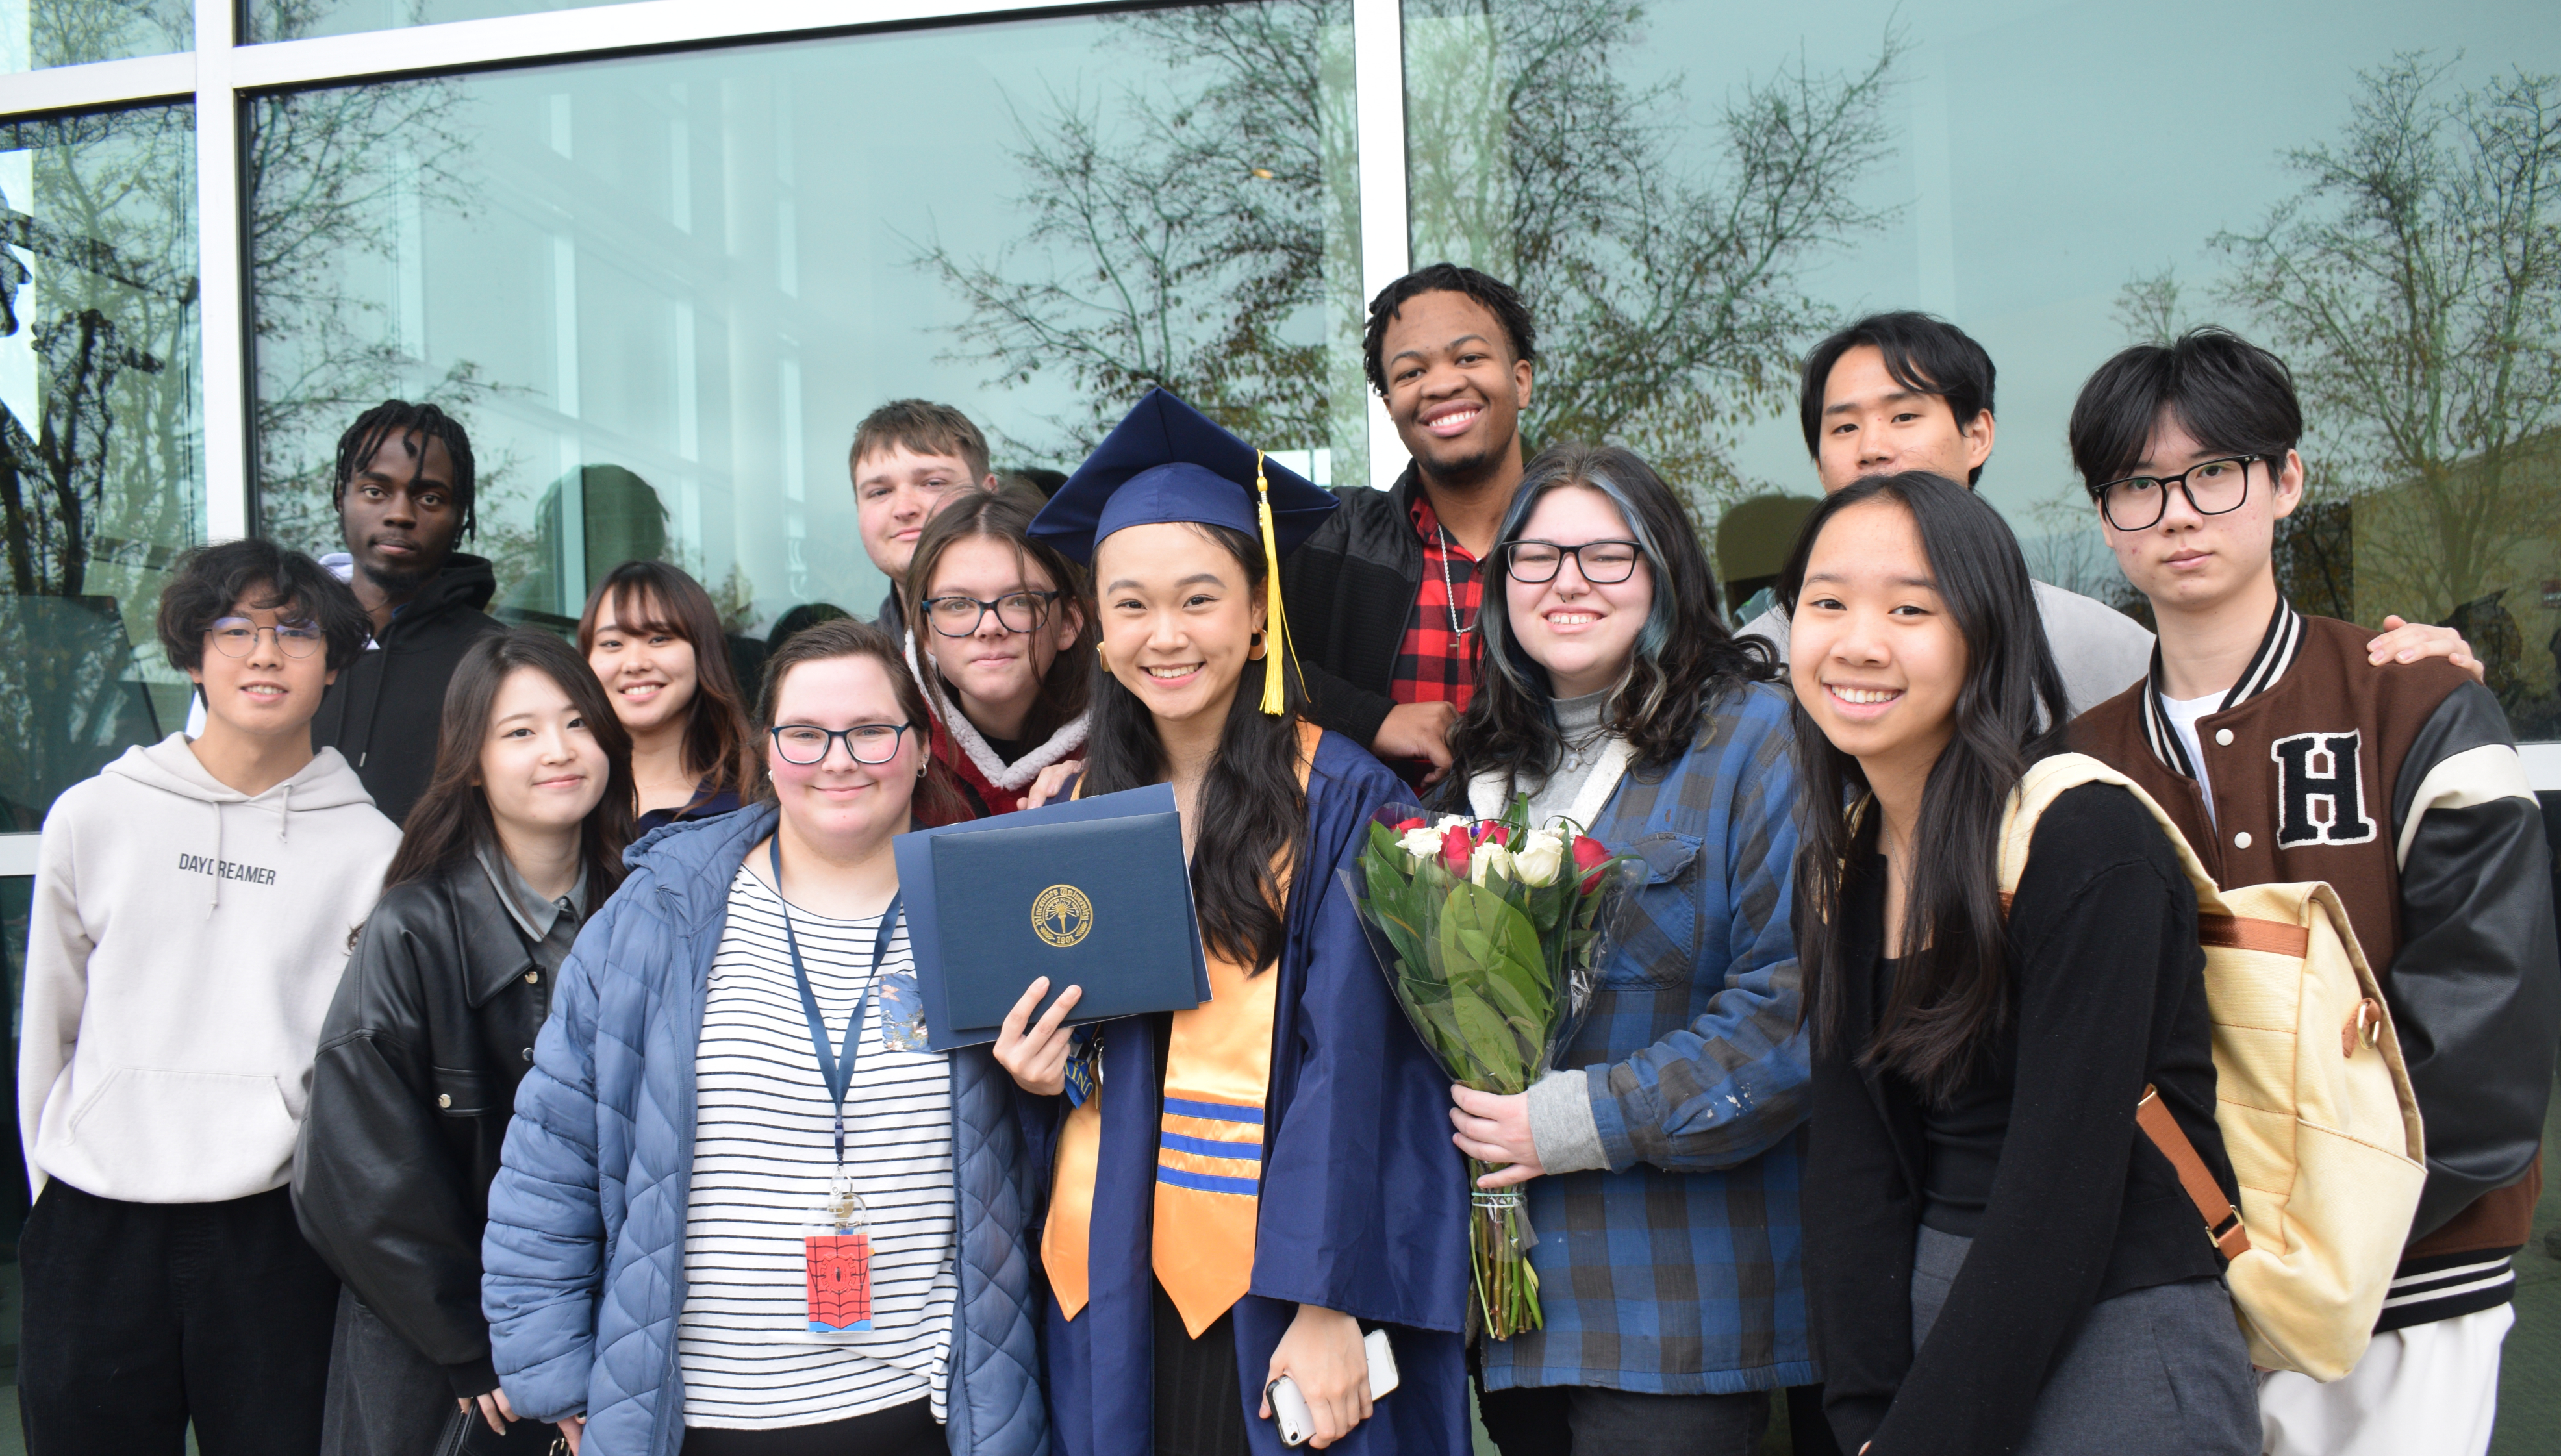 A diverse group of VU students and a VU graduate wearing a cap and gown pose for a group photo.